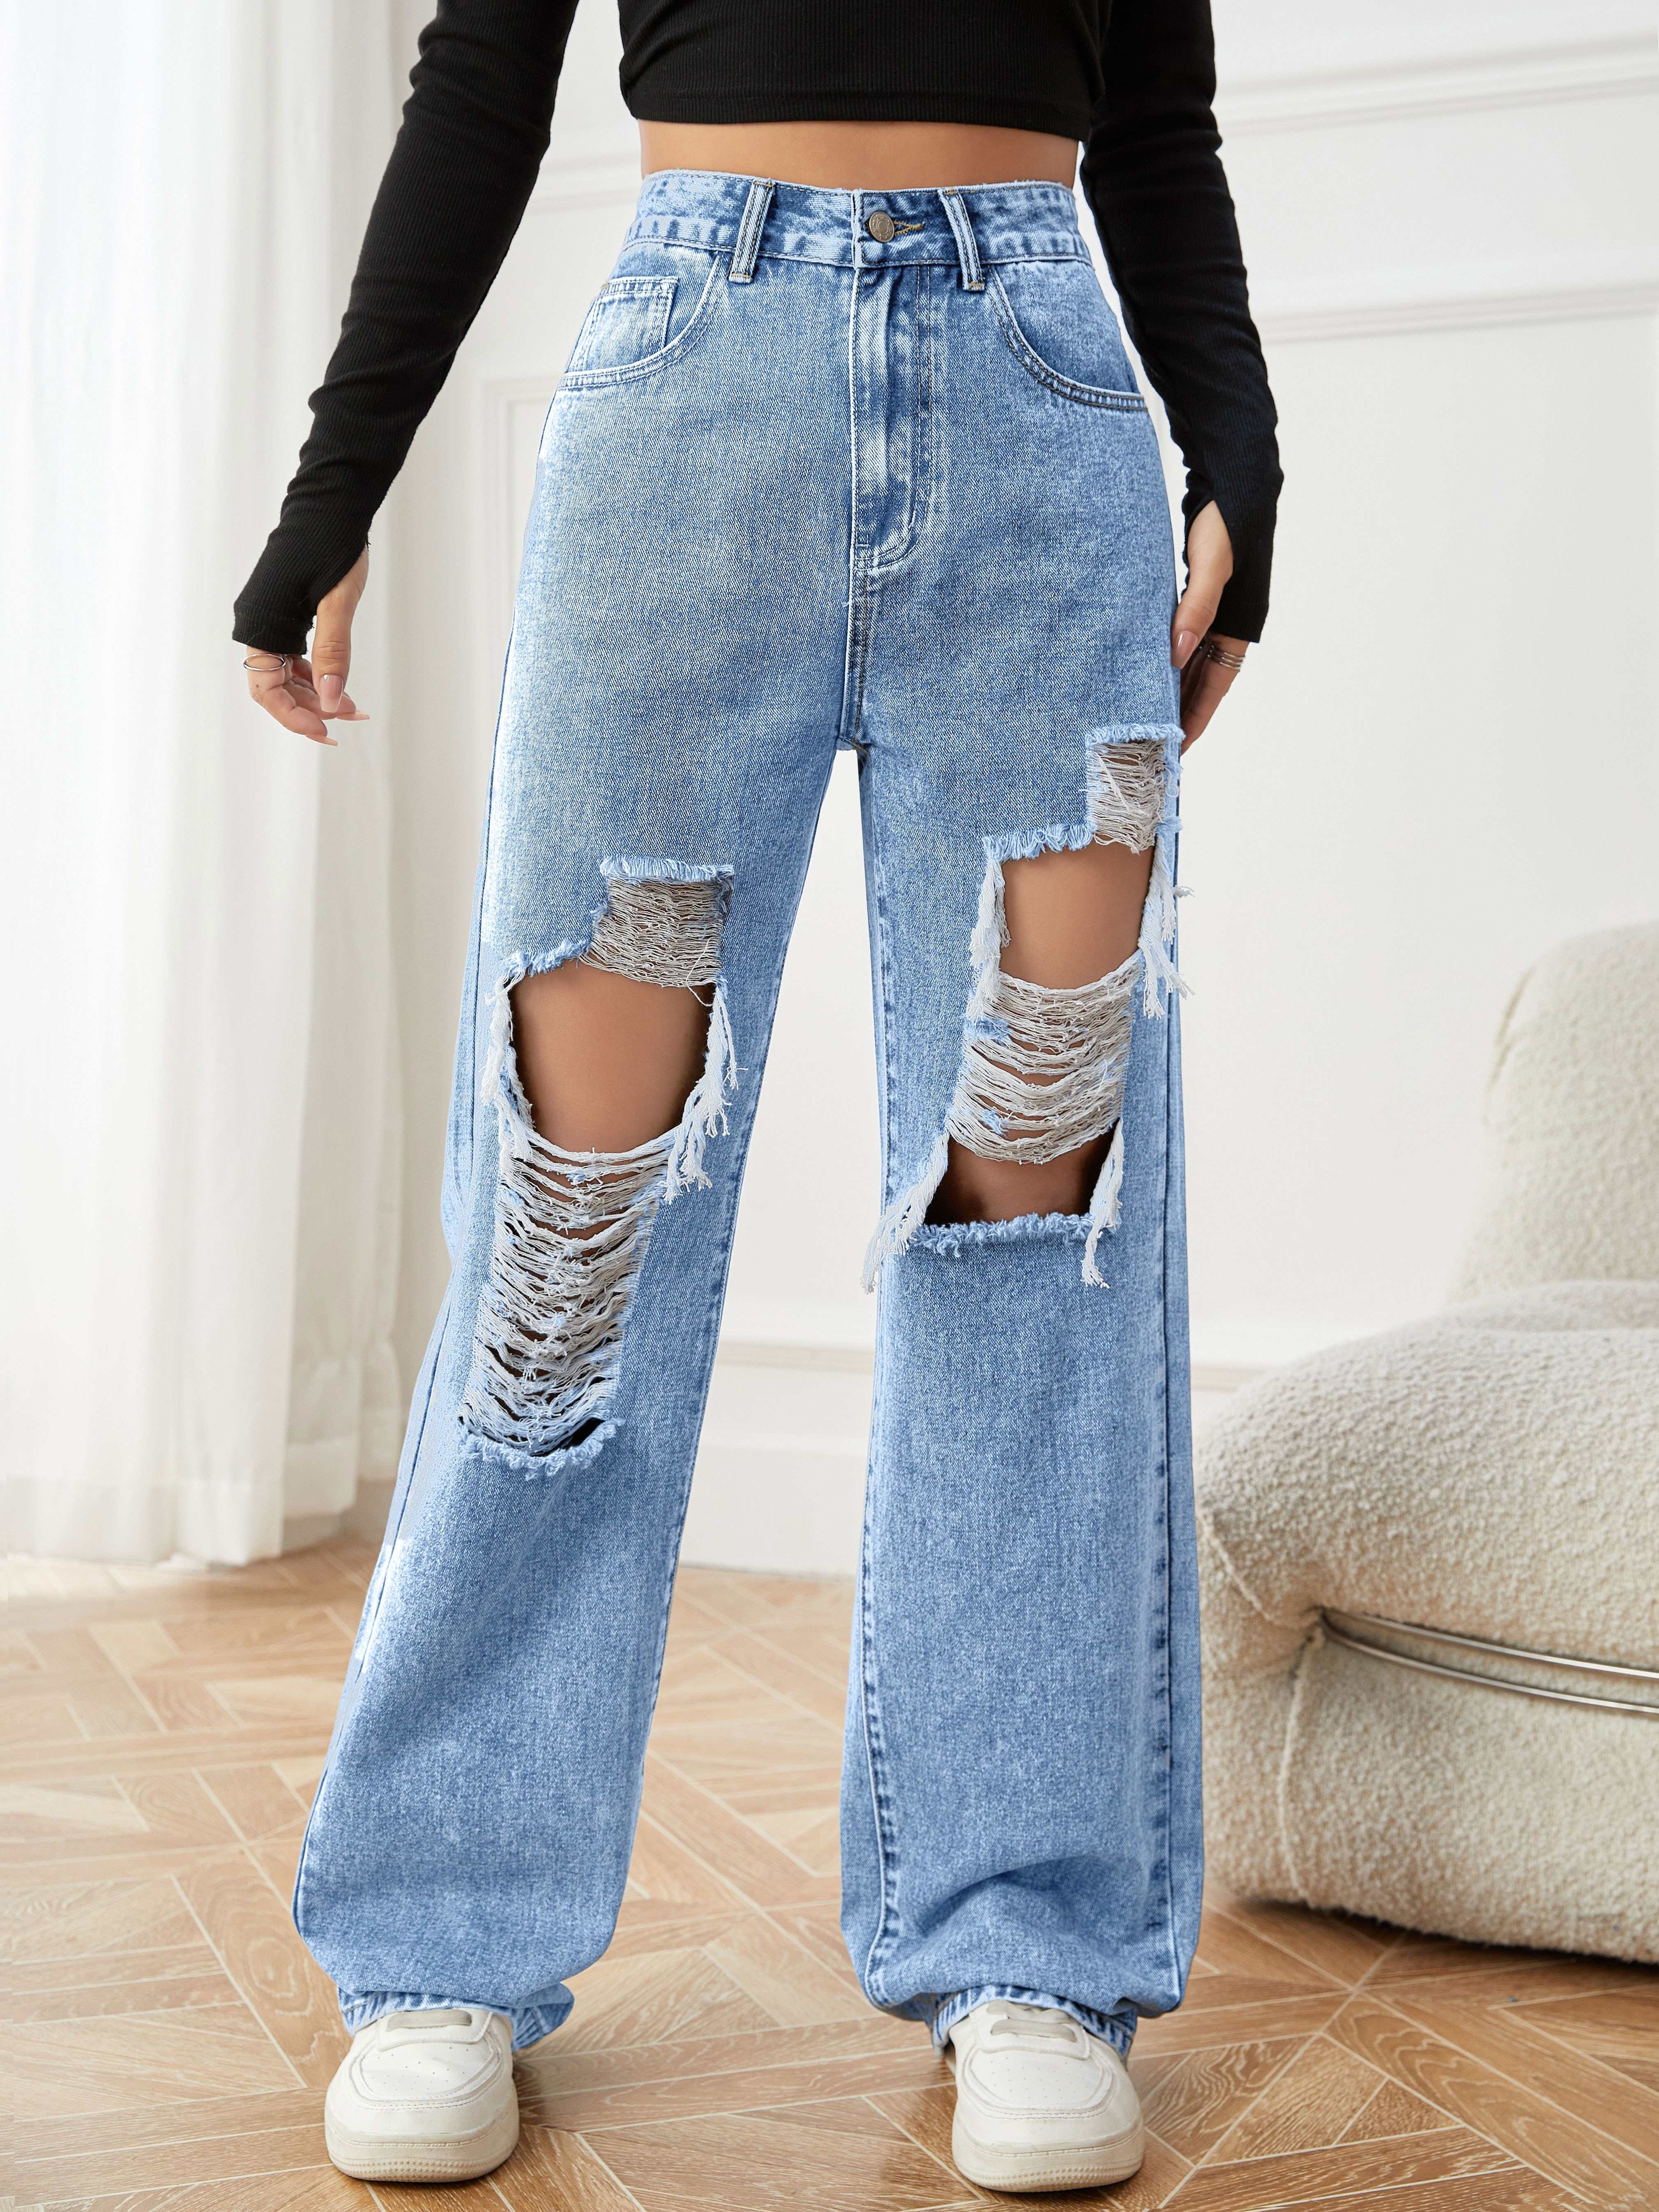 GTTGXS Women High Waist Casual Jeans Washed Distressed Hole Jeans Stretch  Skinny Denim Pants Street Ripped Sexy Ladies Pencil Pants (Color : Blue,  Size : L code) price in UAE,  UAE